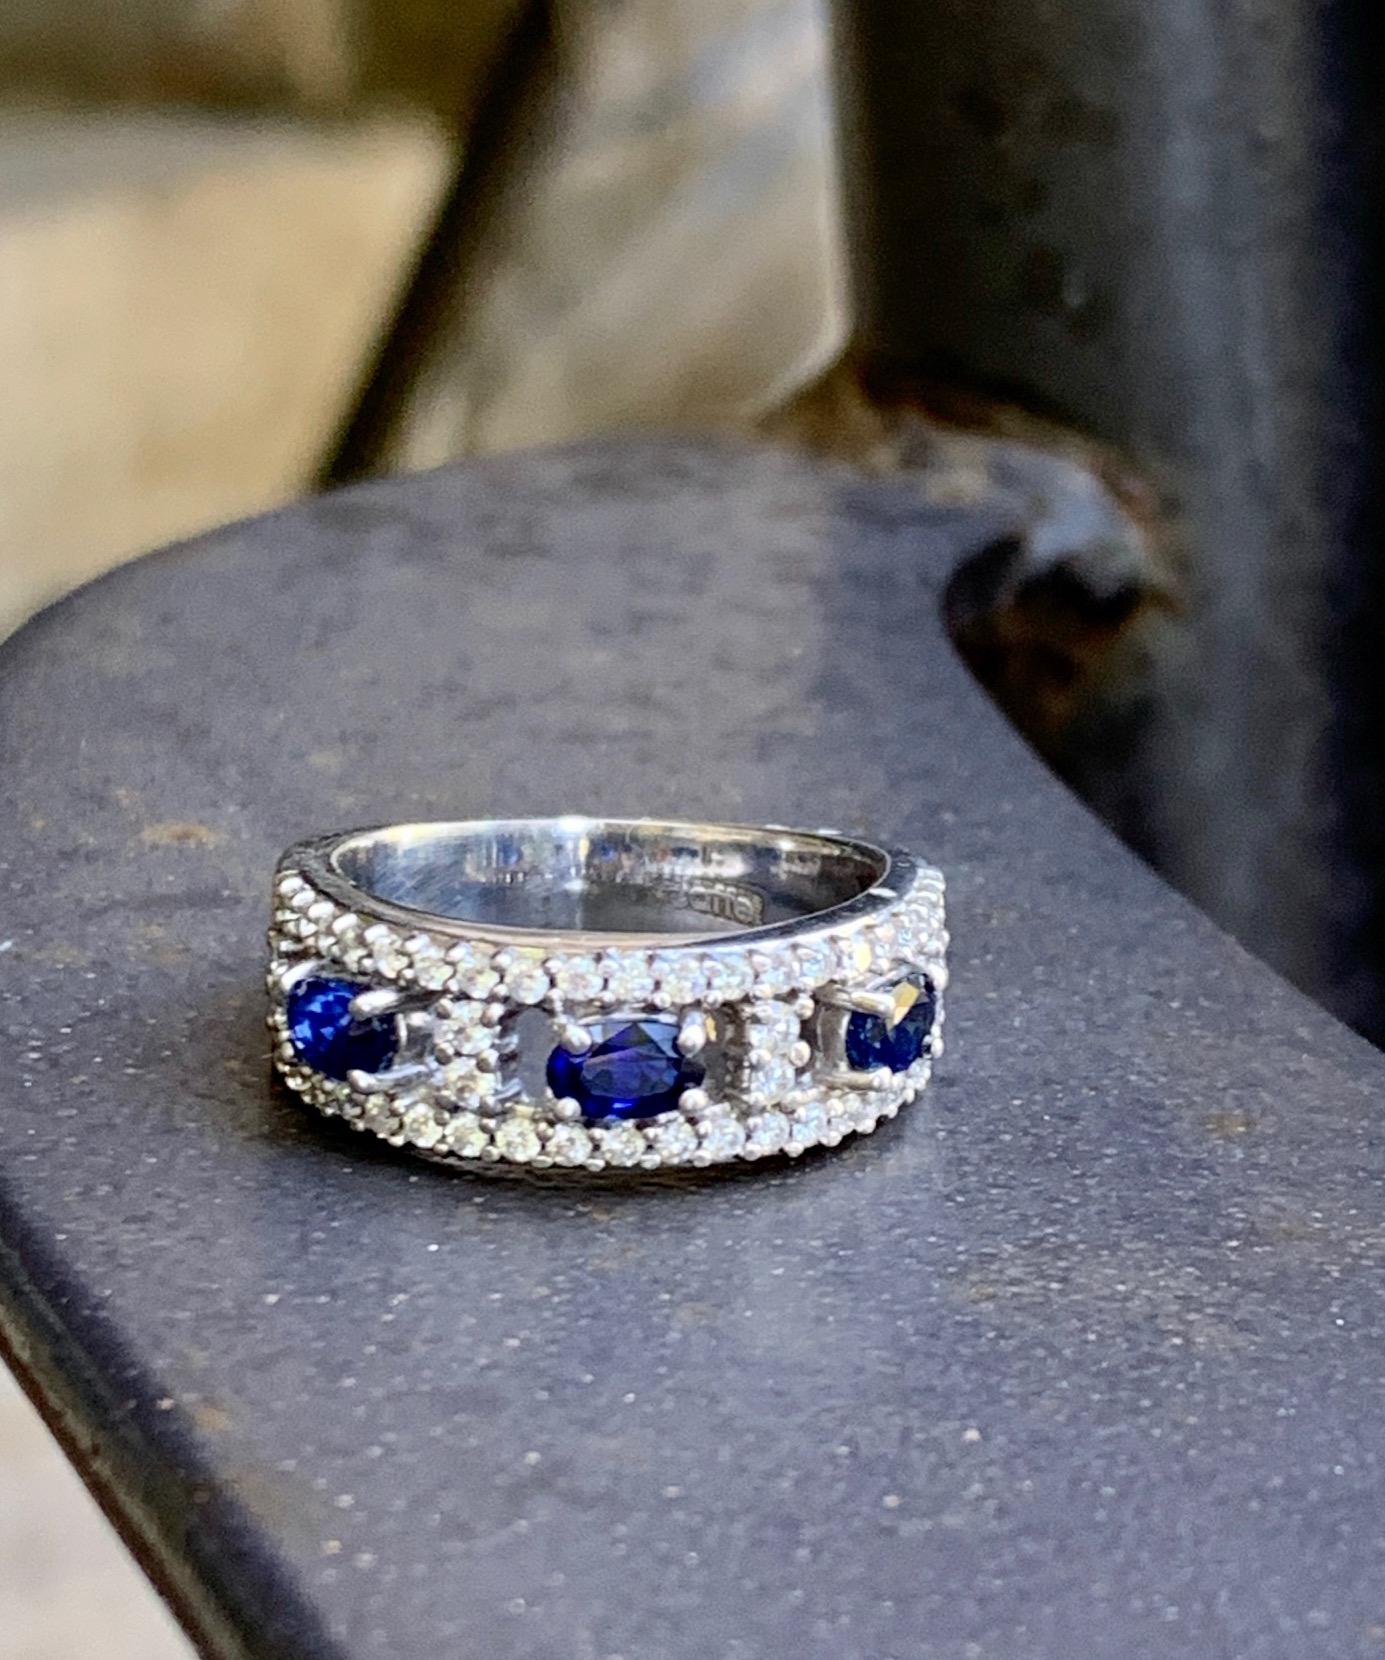 This beautiful ring features three 5x3mm oval, faceted blu Sapphires and 46 1.5-1.8mm brilliant cut Diamonds totaling approximately 1.10ctw.  Grade: VS-G/H

Size: 8 1/2 - This ring can be resized, but G. Lindberg Jewels does not provide sizing